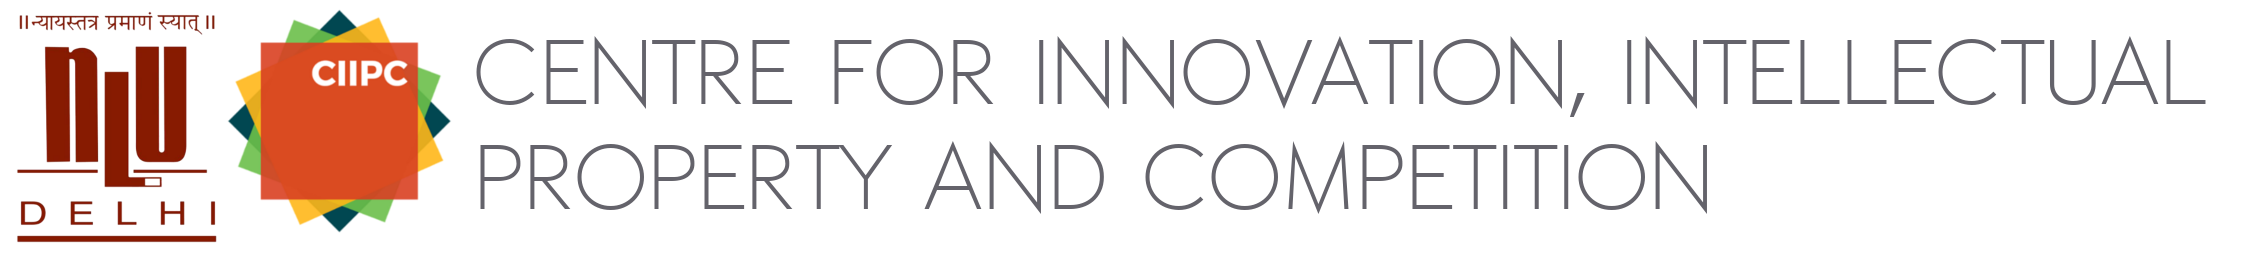 Centre for Innovation, Intellectual Property and Competition